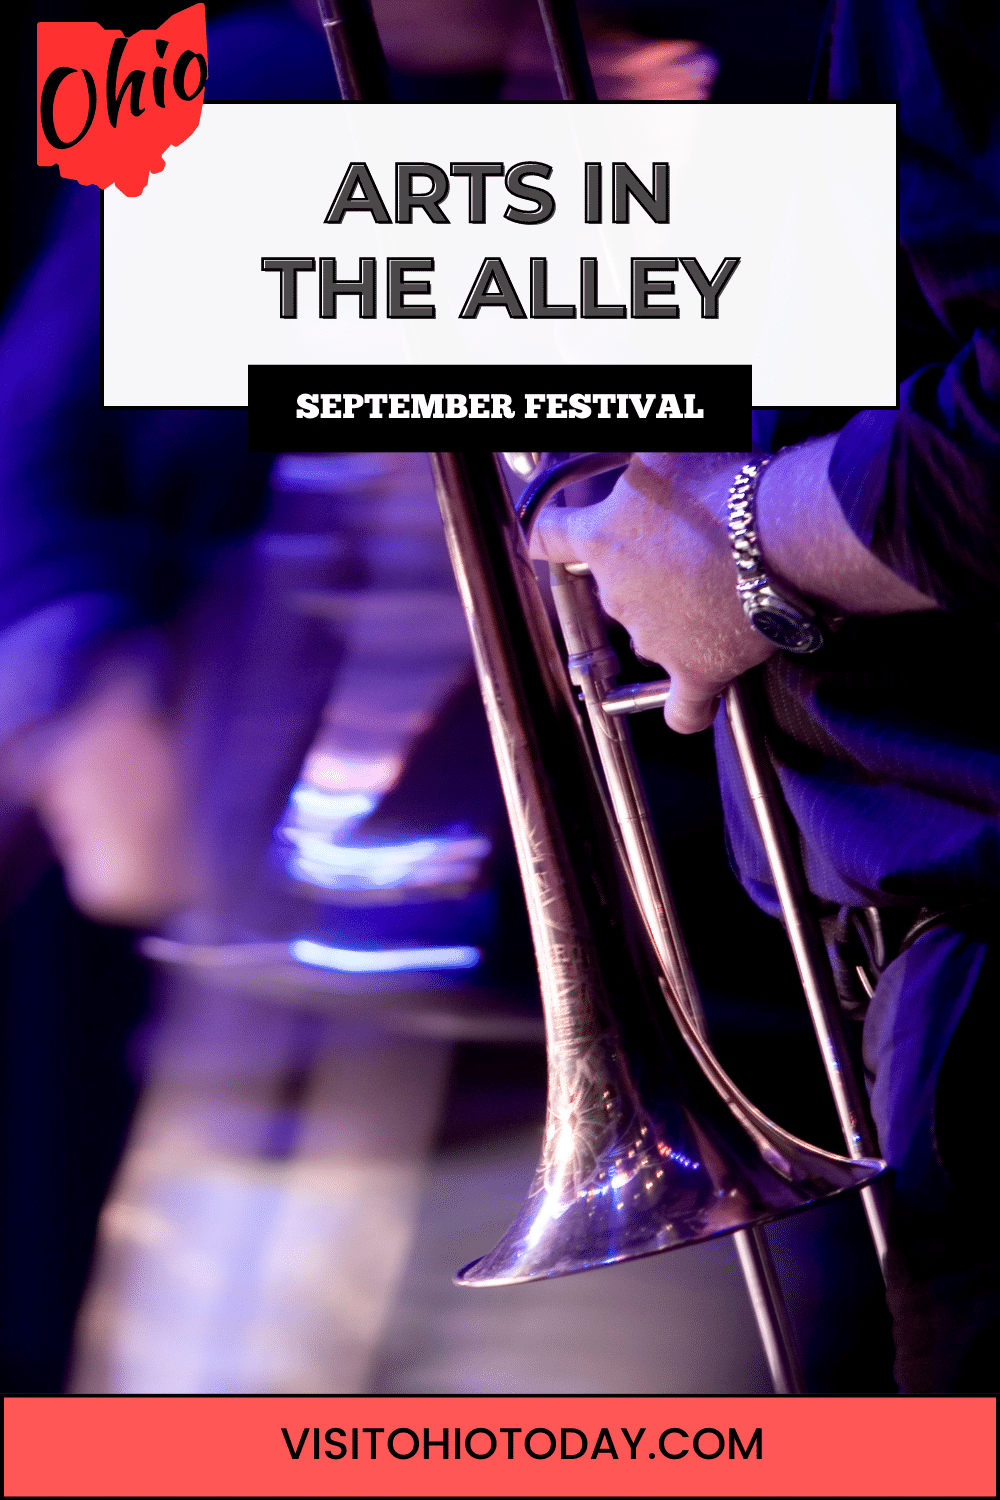 The Arts in the Alley Music and Arts Festival is held in Grove City's historic town center on the weekend of September 15-17, 2023.